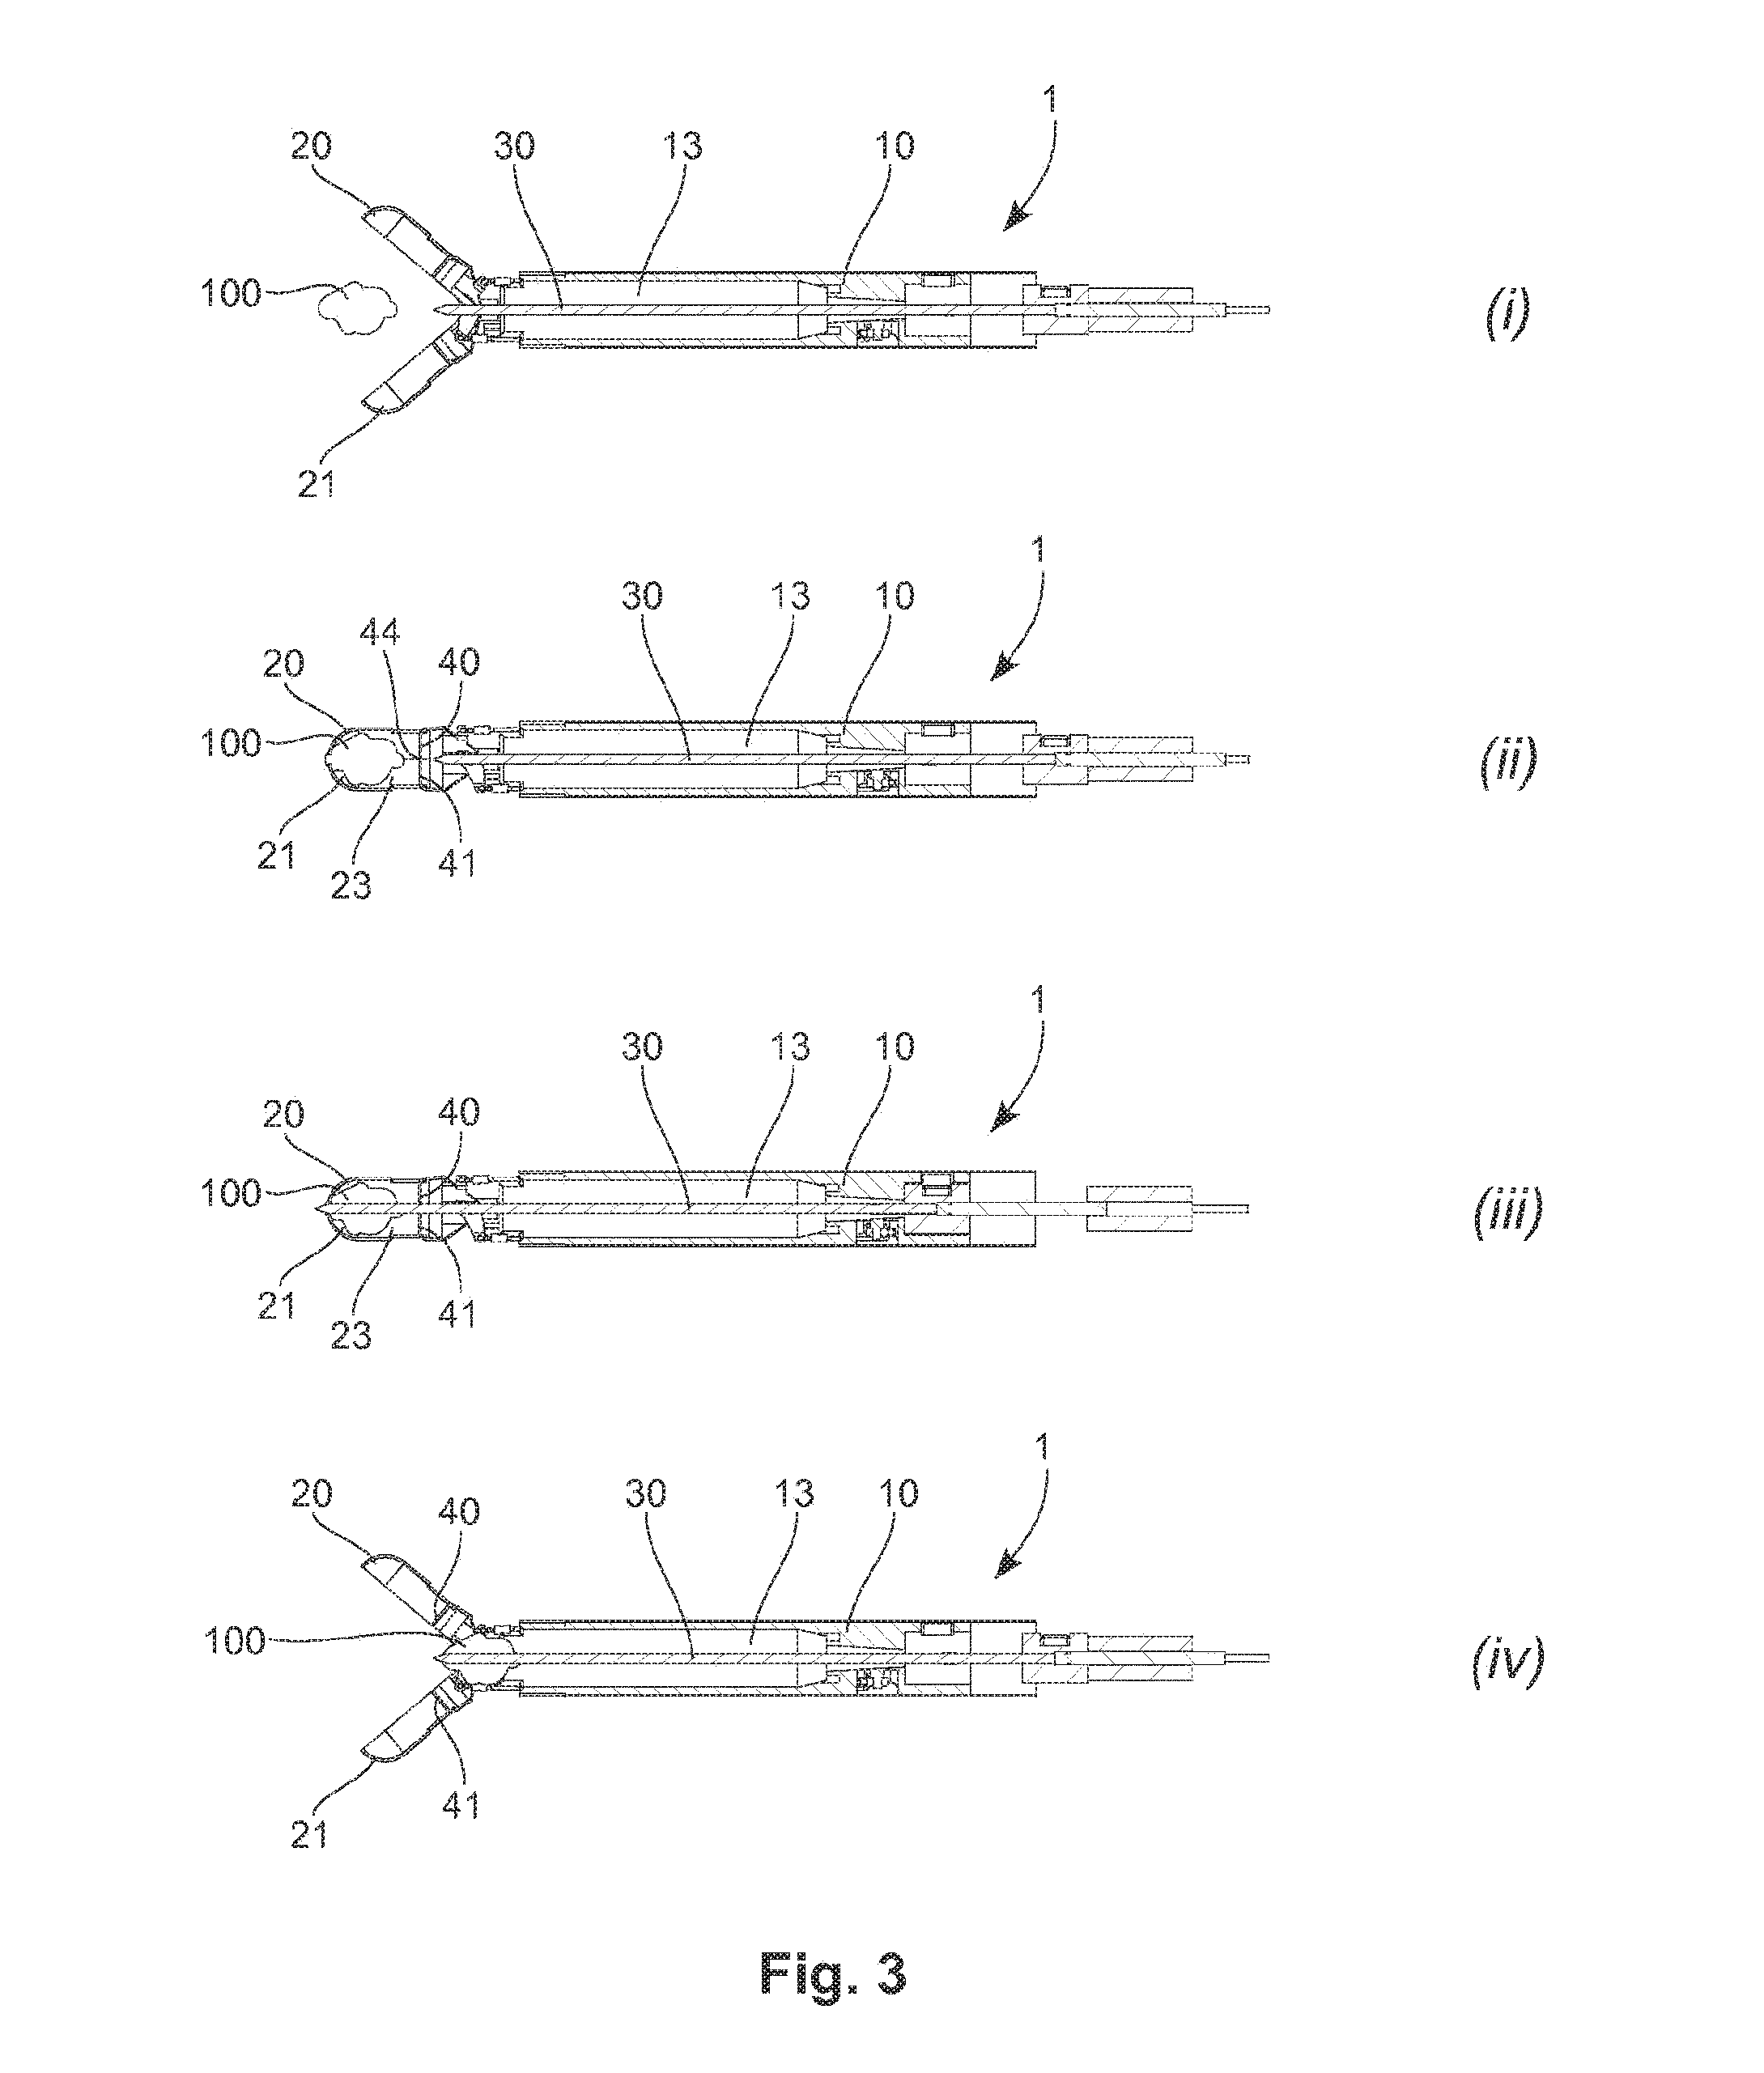 Endoscopic device for multiple sample biopsy